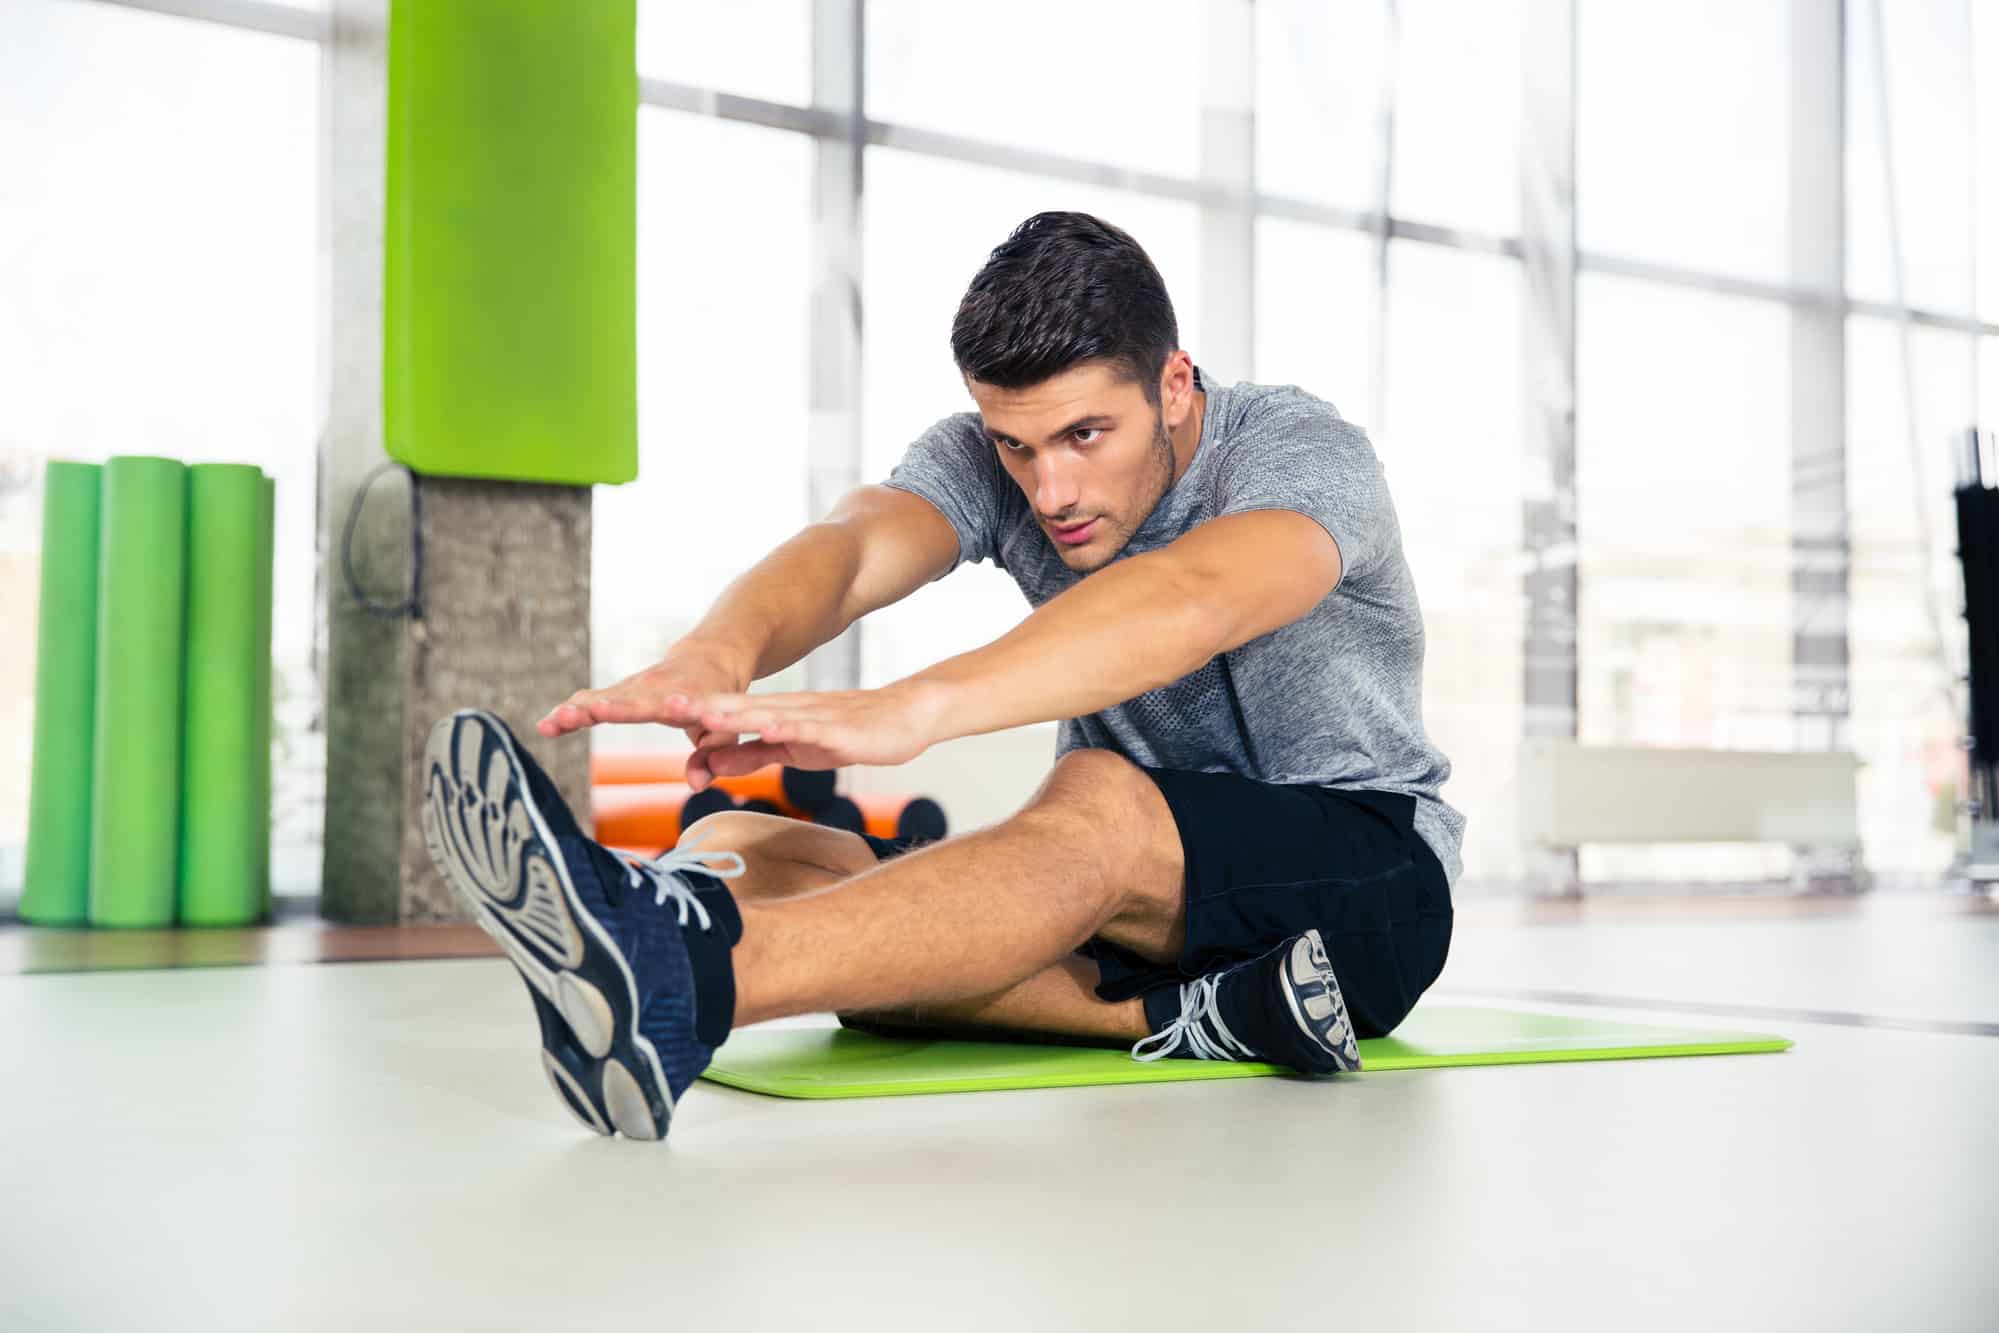 The Role of Flexibility and Mobility Exercises in Injury Prevention and Overall Fitness